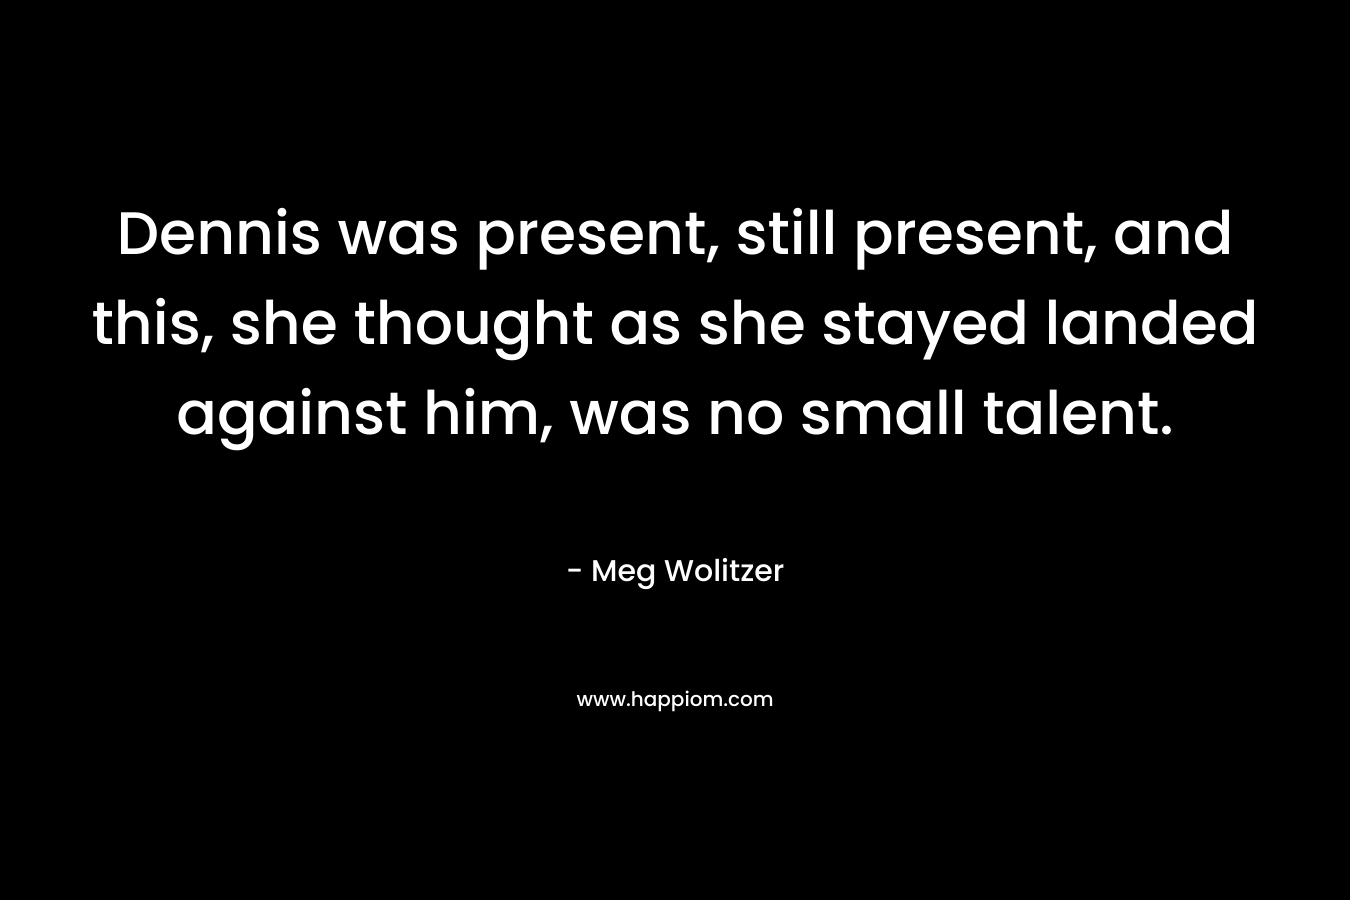 Dennis was present, still present, and this, she thought as she stayed landed against him, was no small talent. – Meg Wolitzer